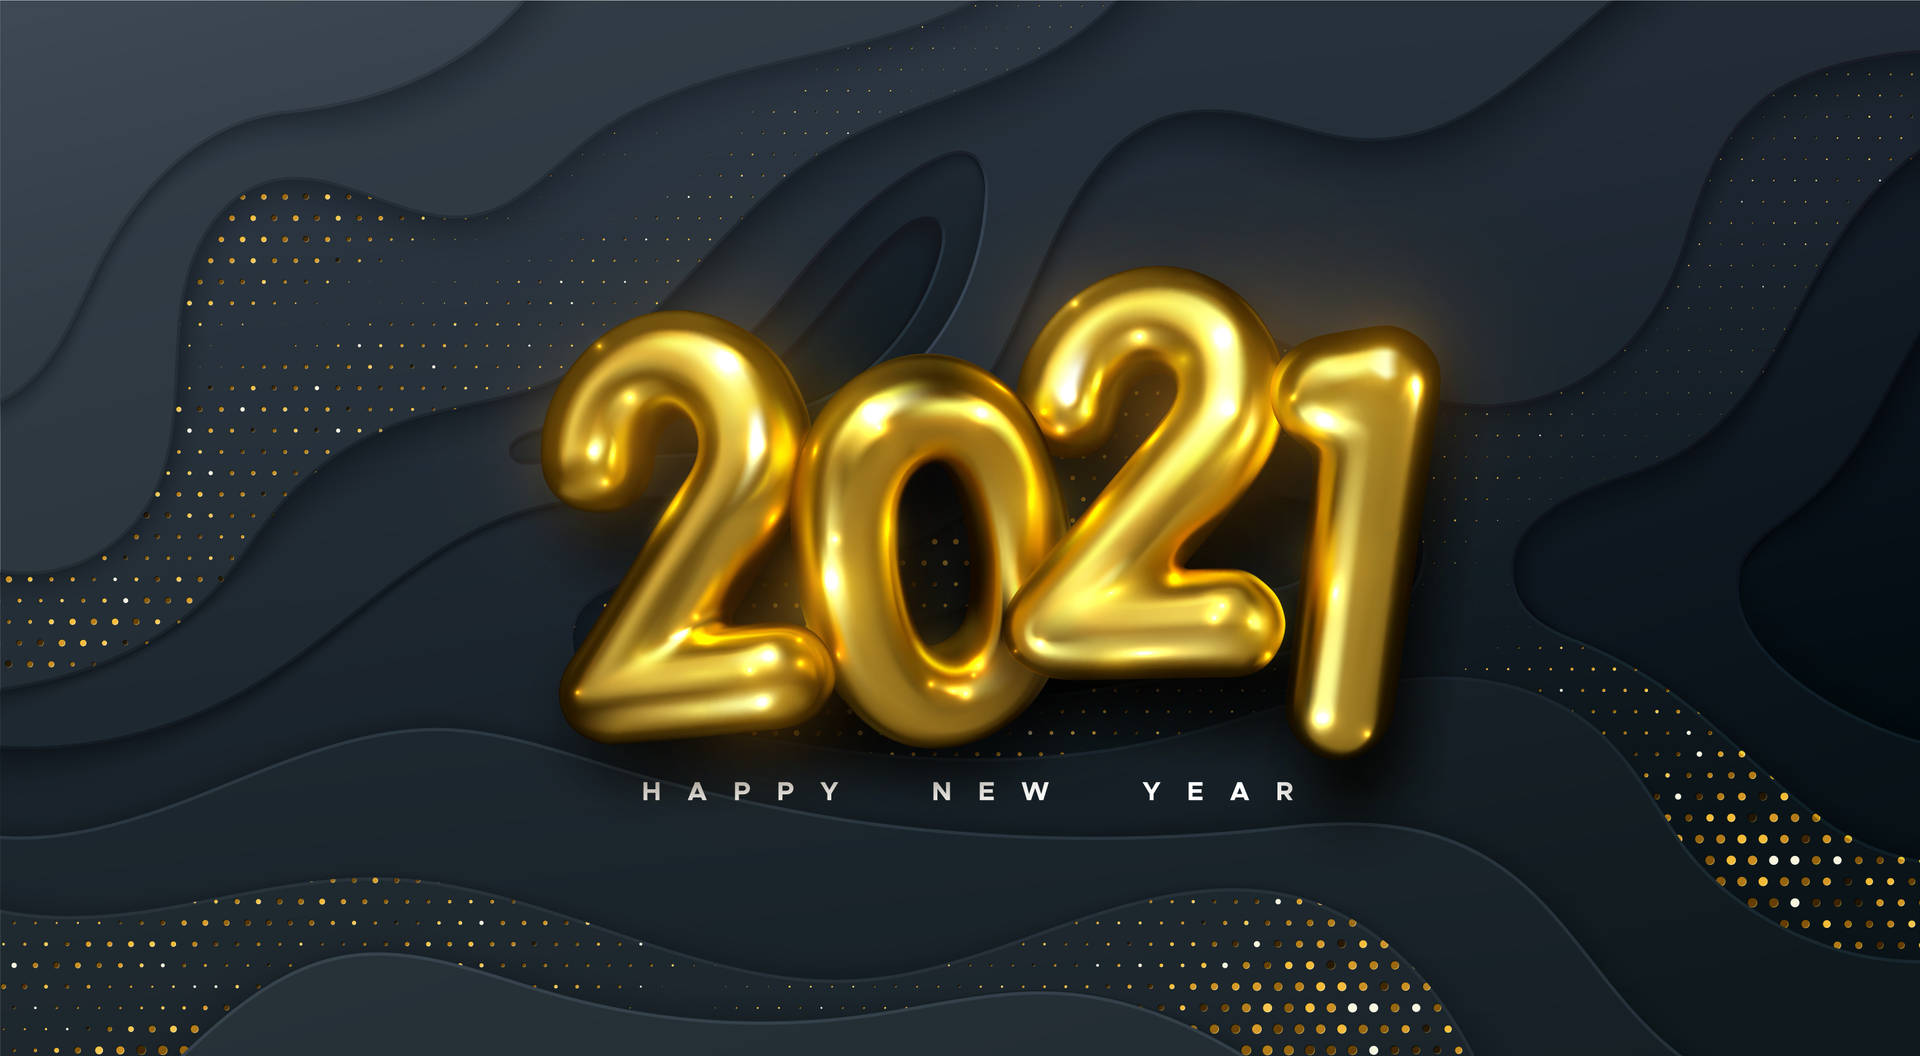 Yellow Foil Happy New Year 2021 Balloons Background